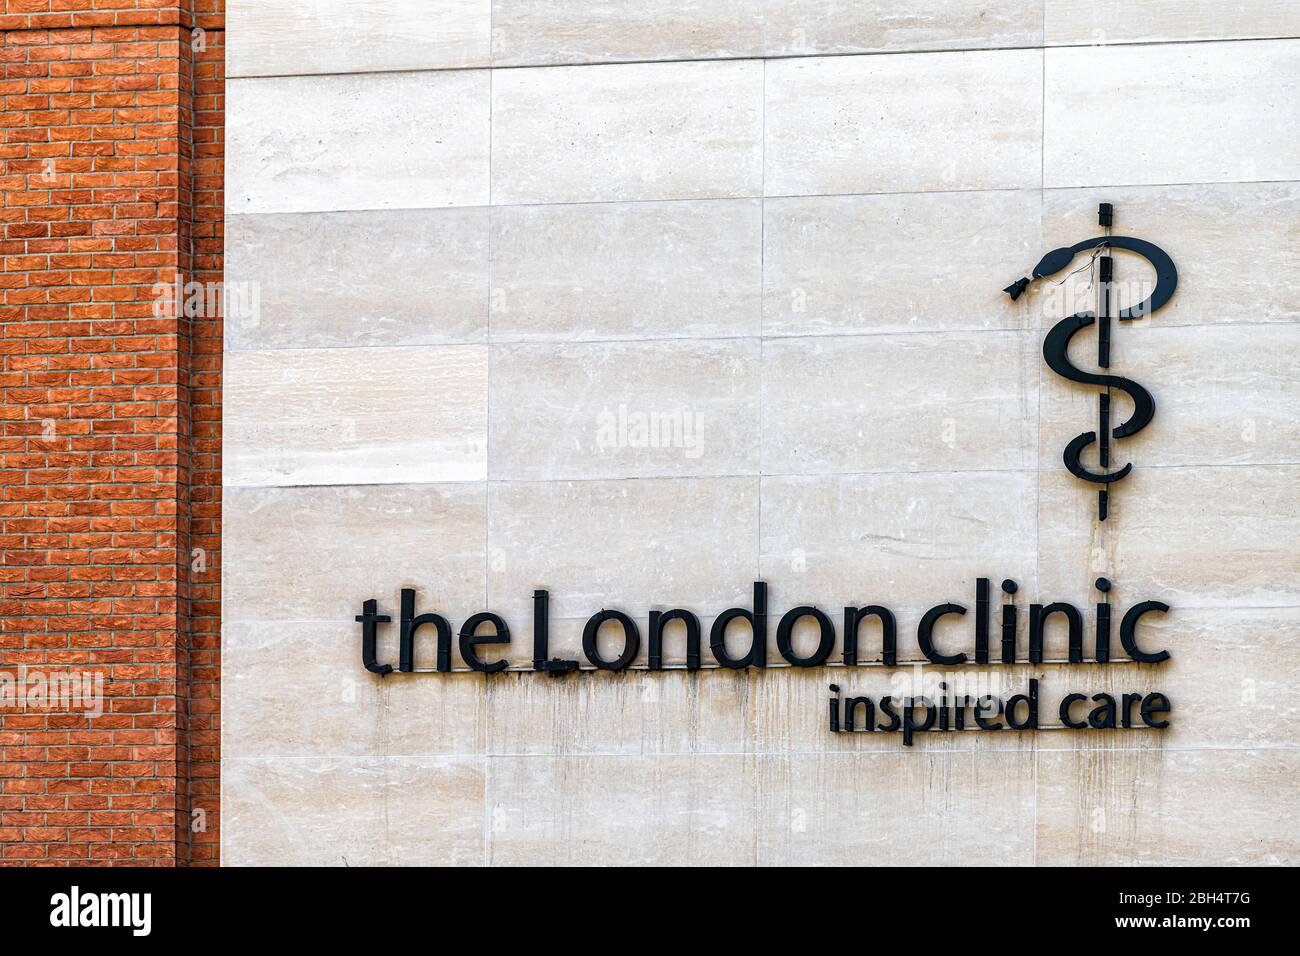 London, UK - June 24, 2018: Building exterior and sign closeup in Marylebone modern architecture for London clinic inspired care hospital logo Stock Photo